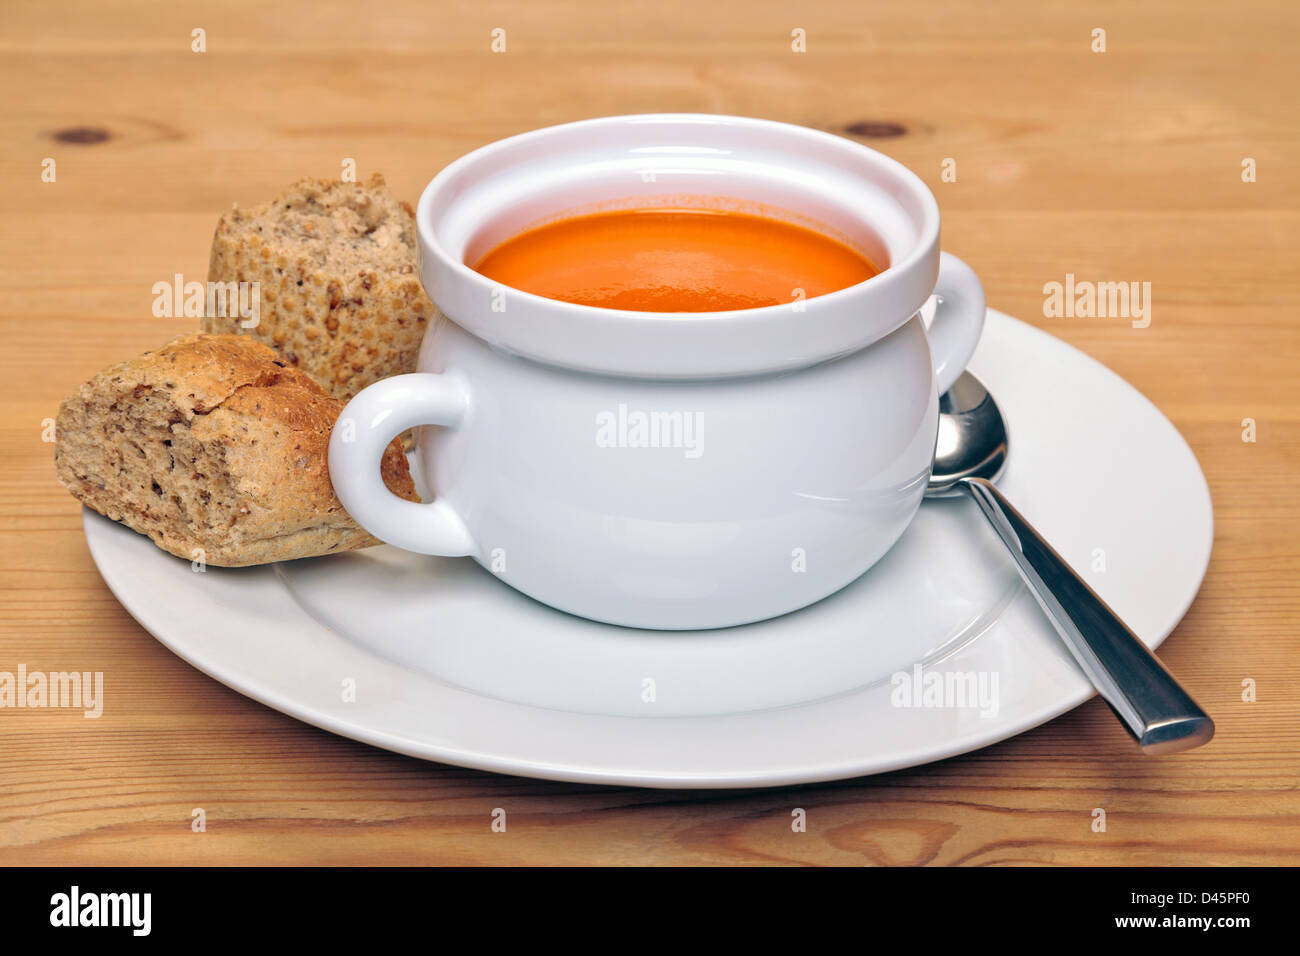 Bowl of hot tomatoe soup with fresh brown granary bread on a wooden table. Stock Photo